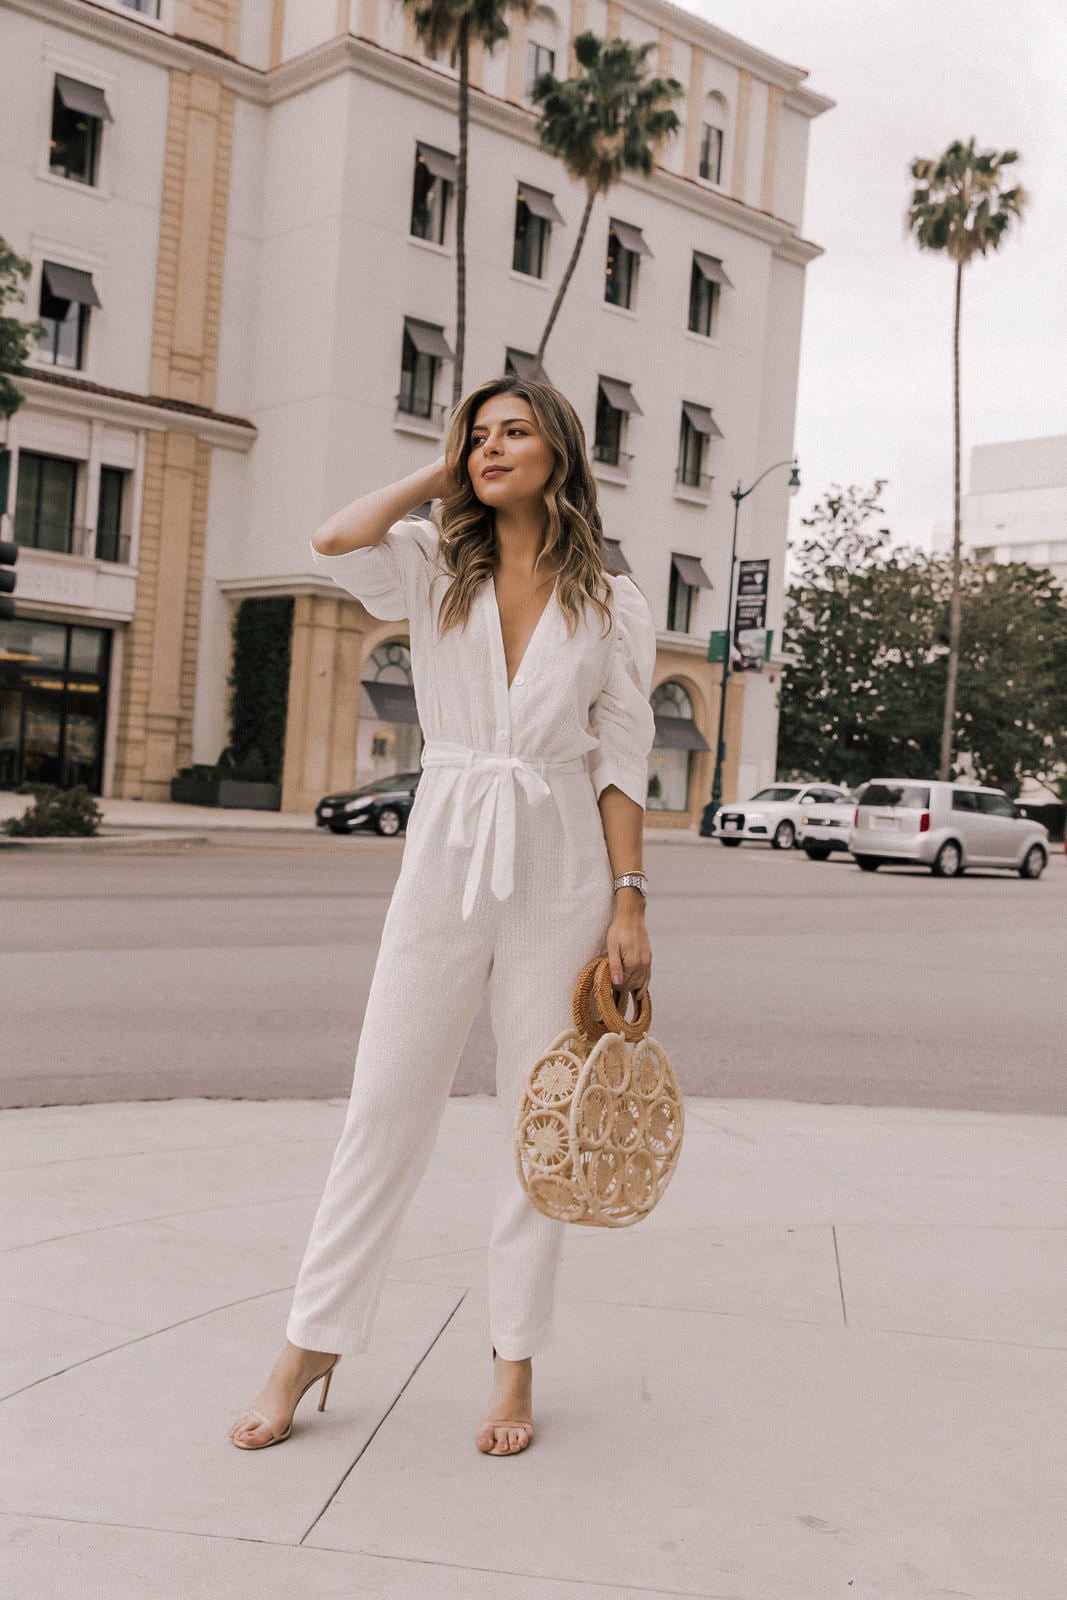 How to Wear a Jumpsuit When You're Petite - The Girl from Panama